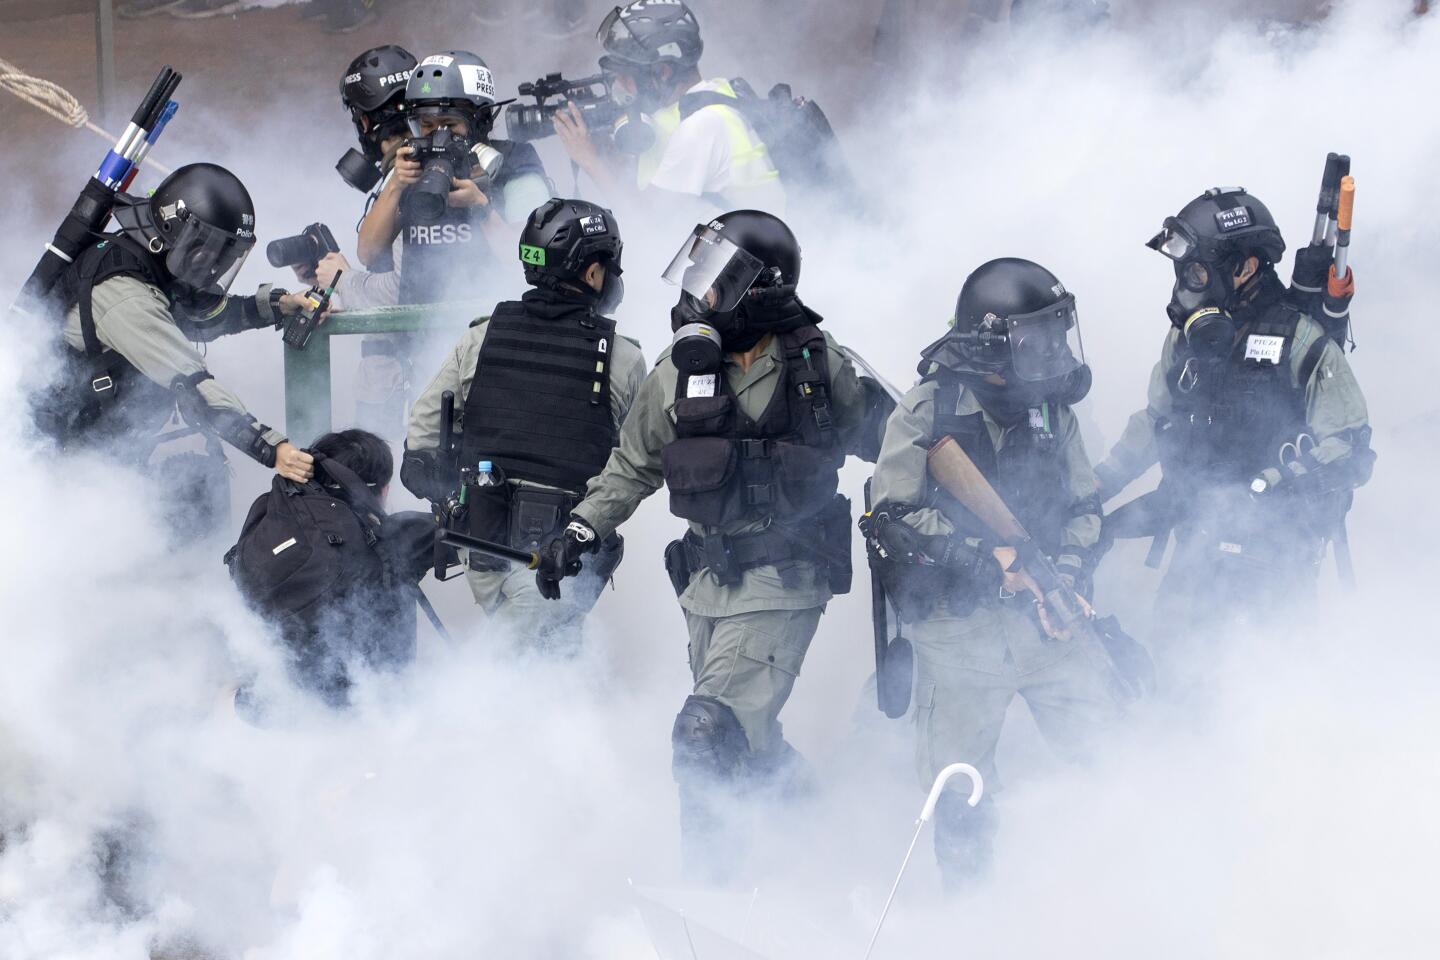 Police in riot gear move through a cloud of smoke as they detain a protestor at the Hong Kong Polytechnic University in Hong Kong, Monday, Nov. 18, 2019. Hong Kong police fought off protesters with tear gas and batons Monday as they tried to break through a police cordon that is trapping hundreds of them on a university campus. (AP Photo/Ng Han Guan)